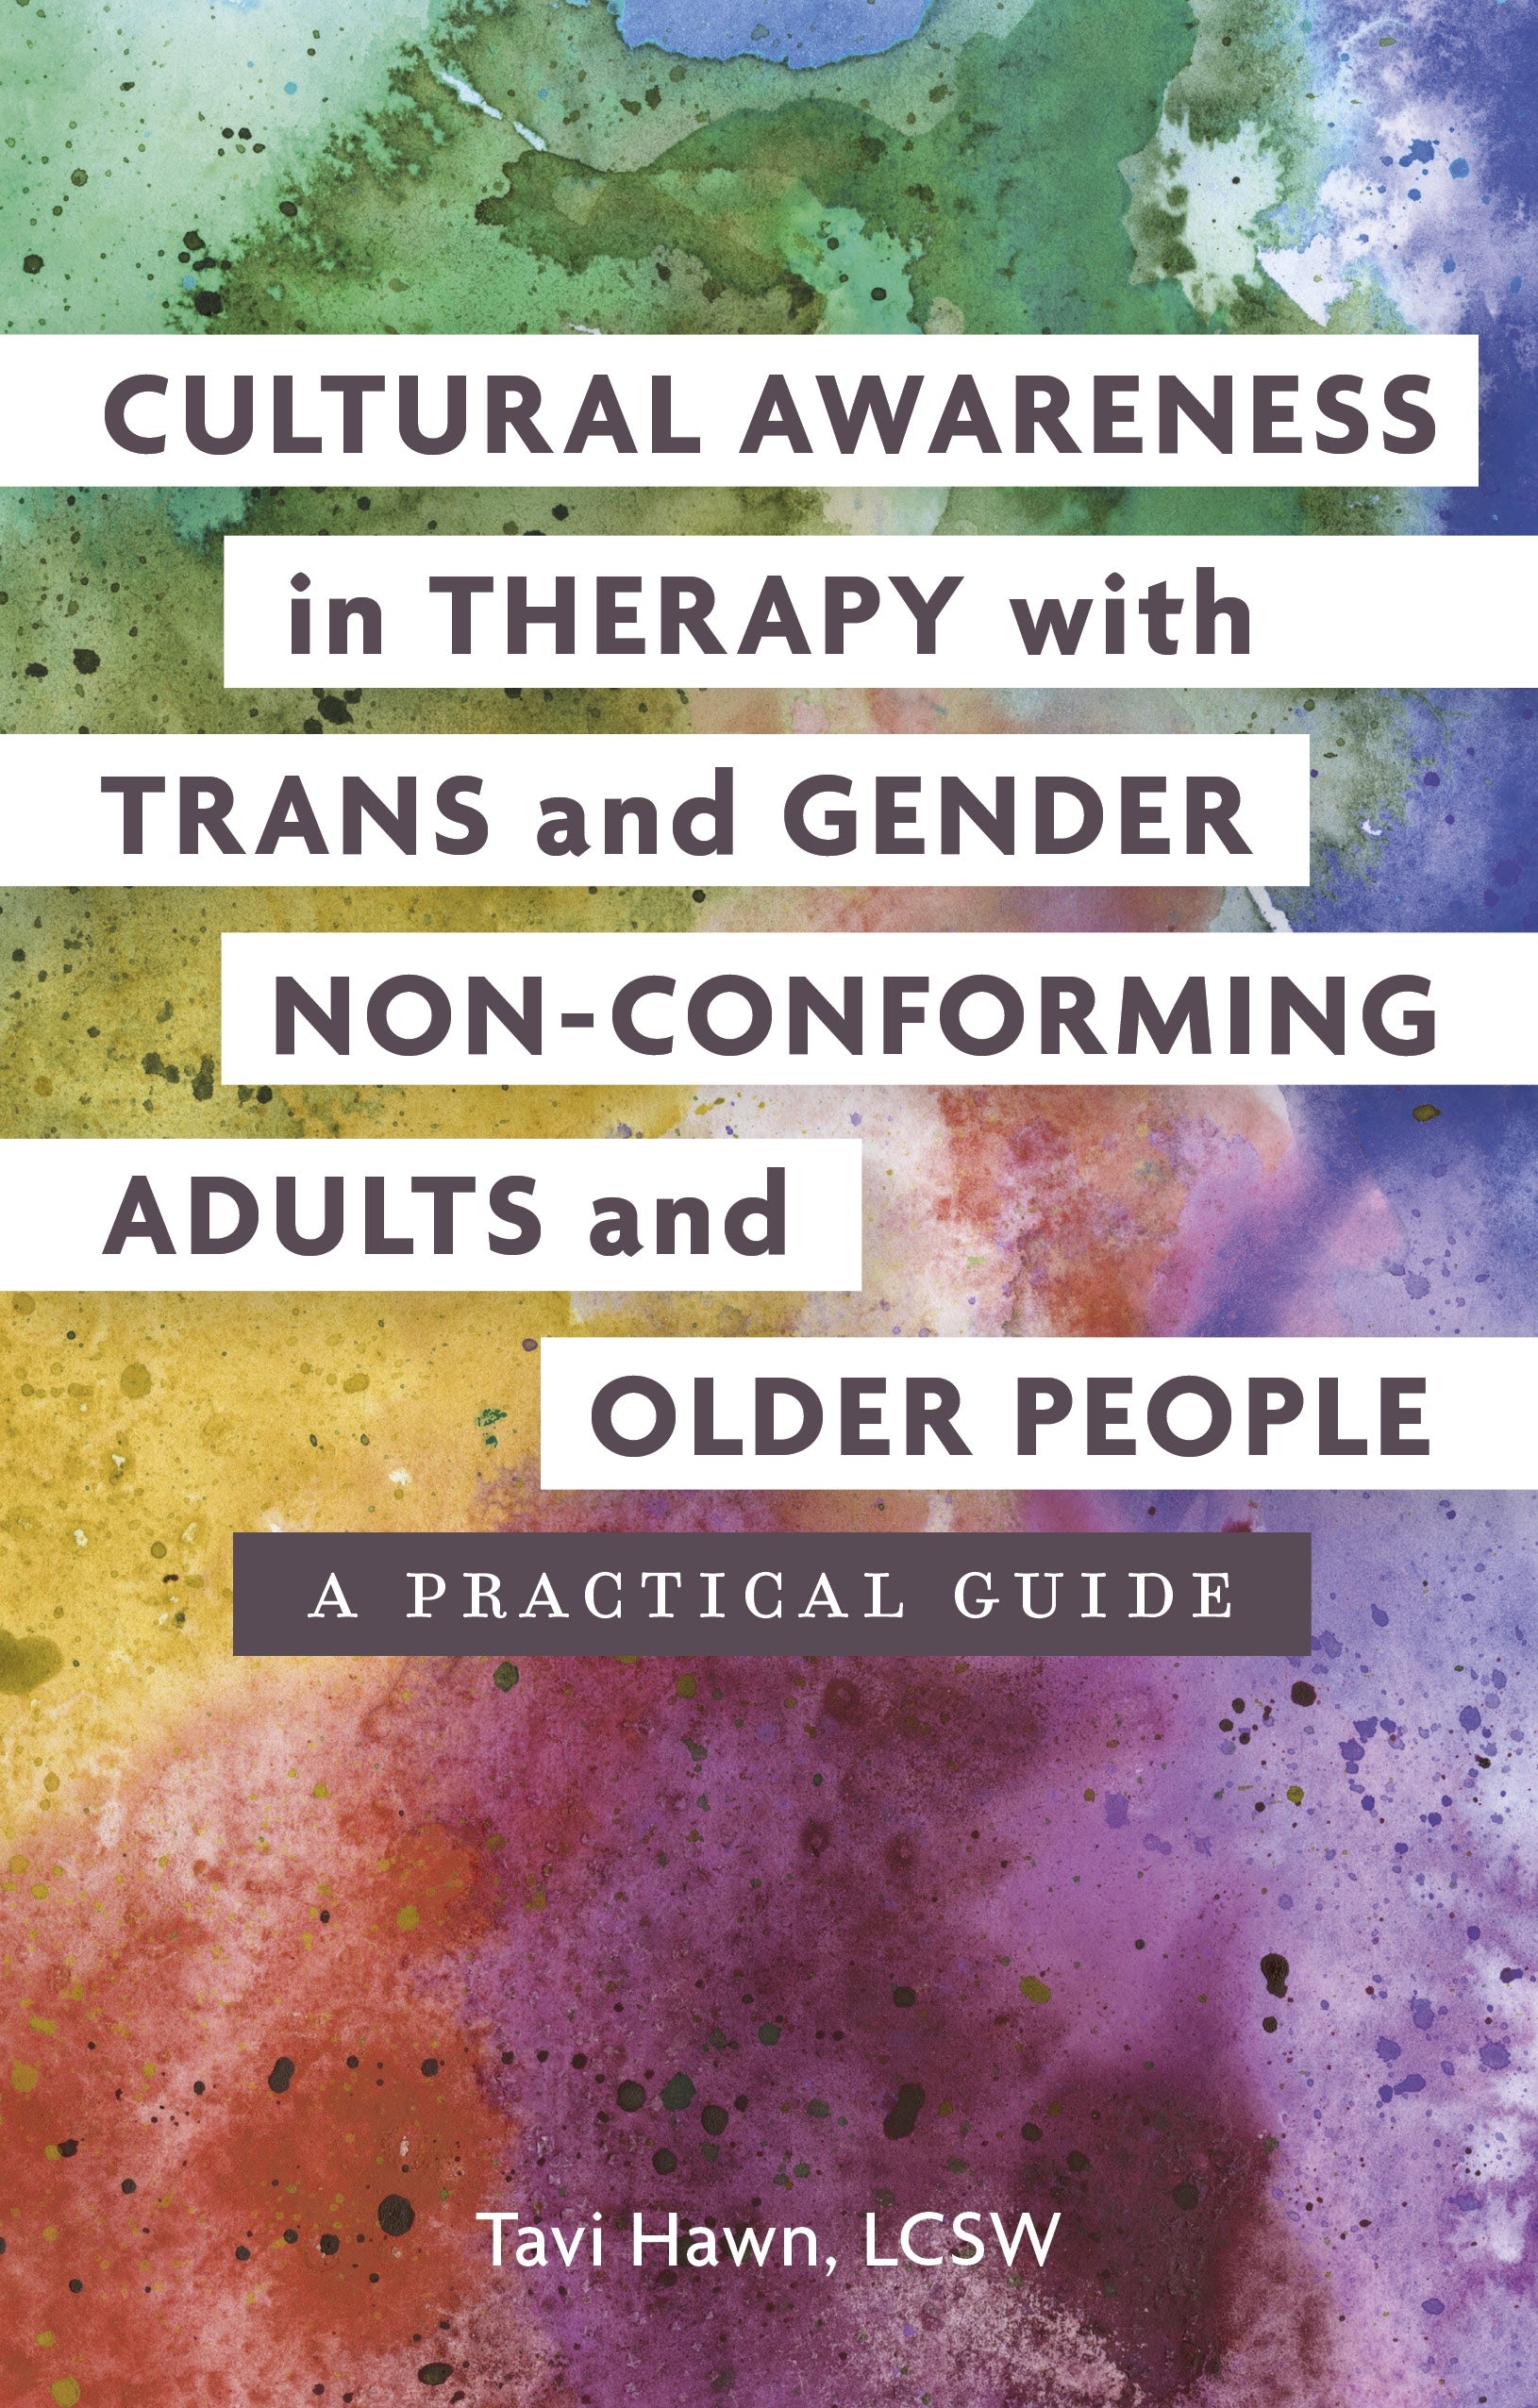 Cultural Awareness in Therapy with Trans and Gender Non-Conforming Adults and Older People by Tavi Hawn